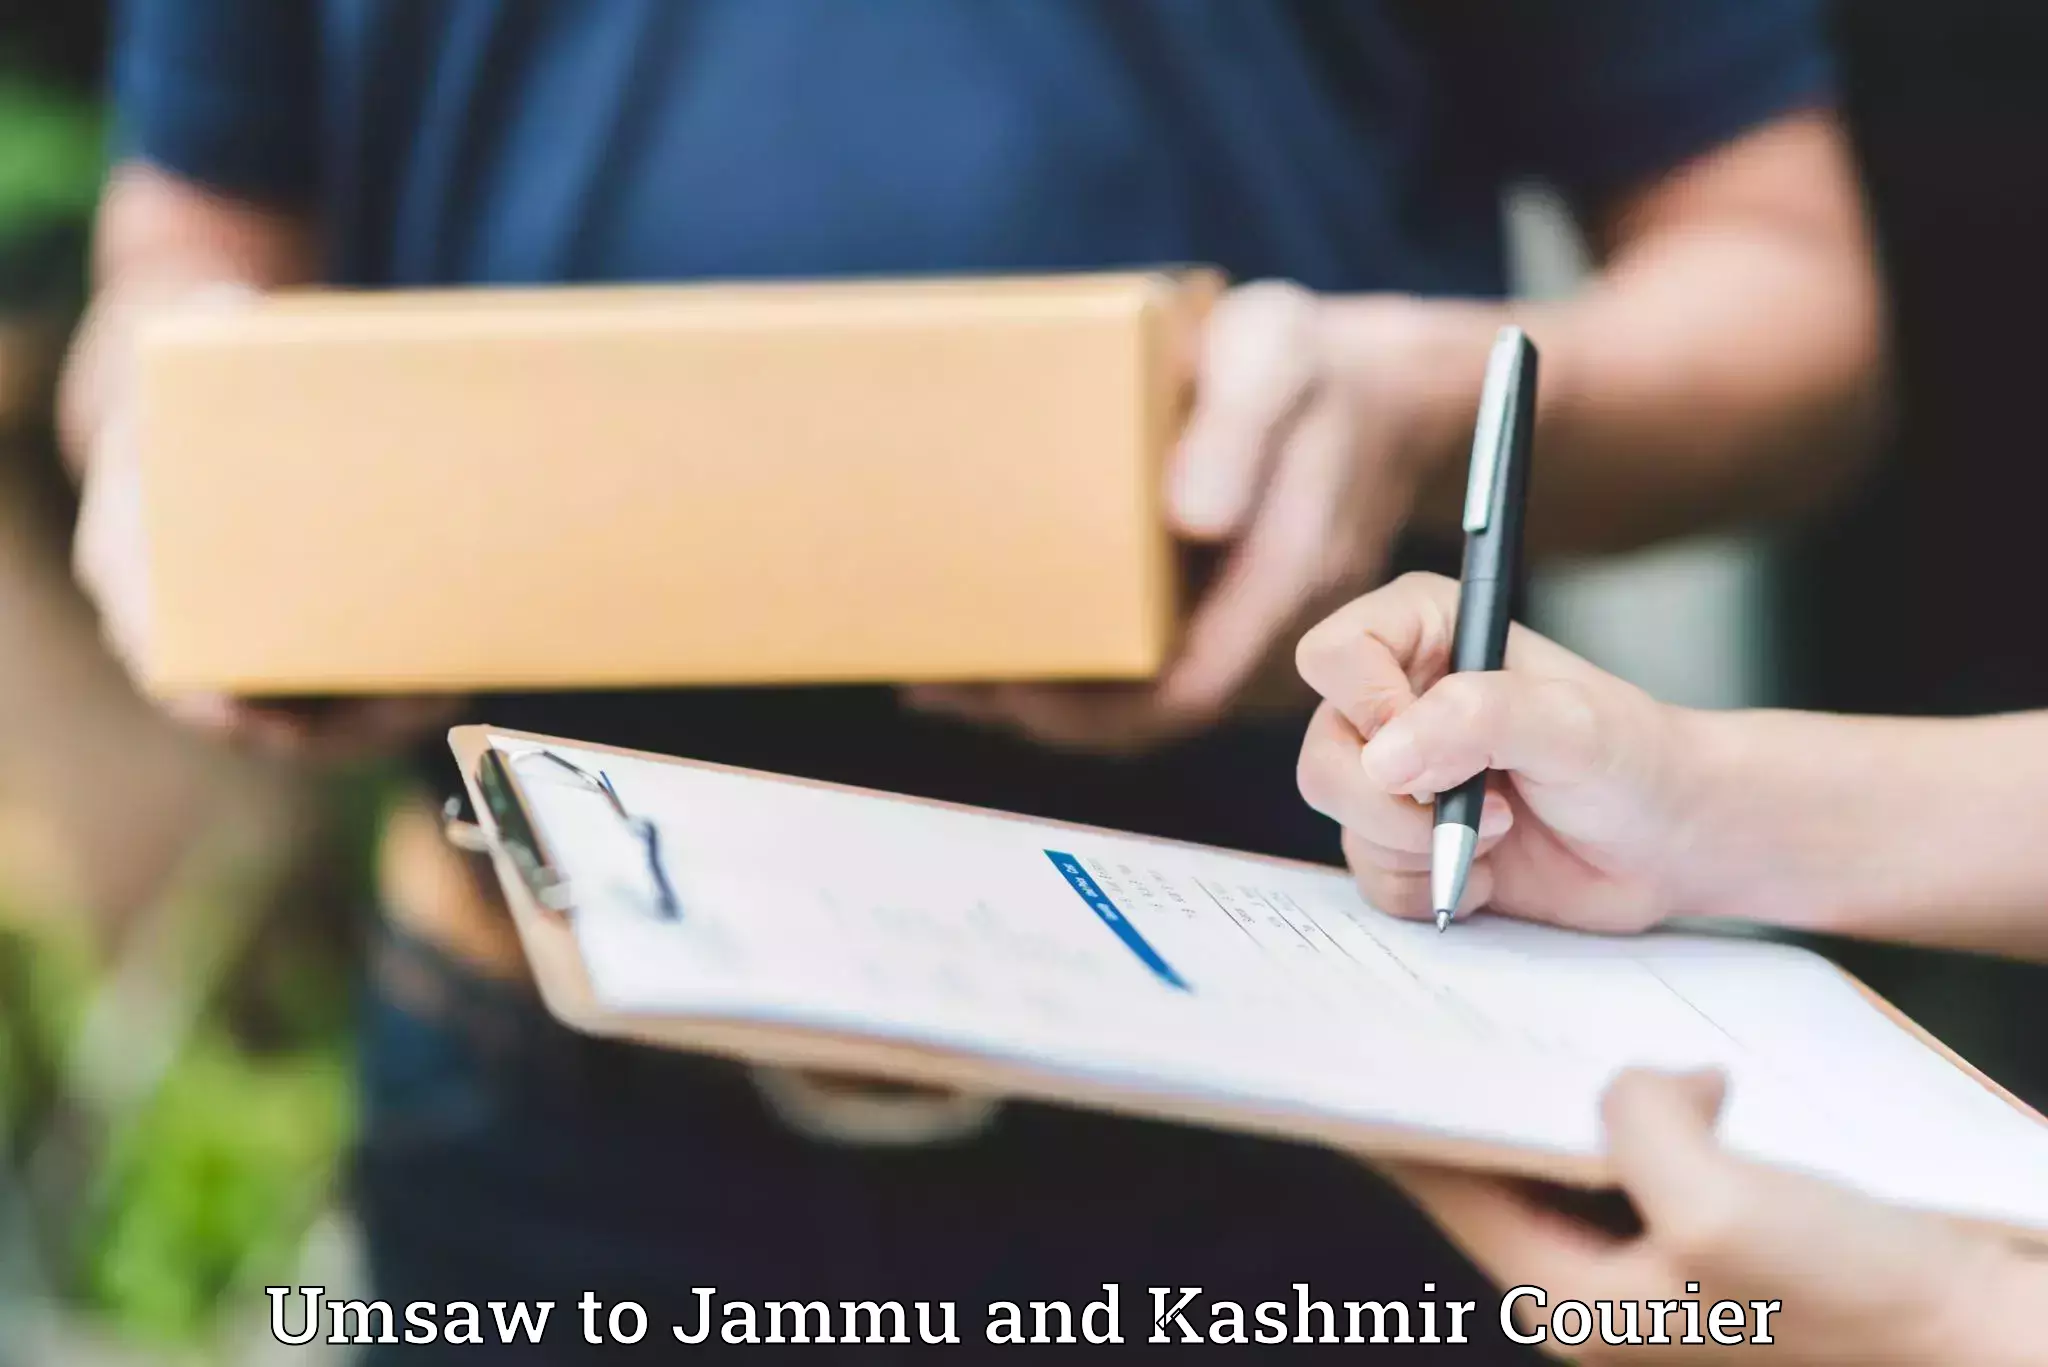 Trusted relocation experts Umsaw to University of Kashmir Srinagar